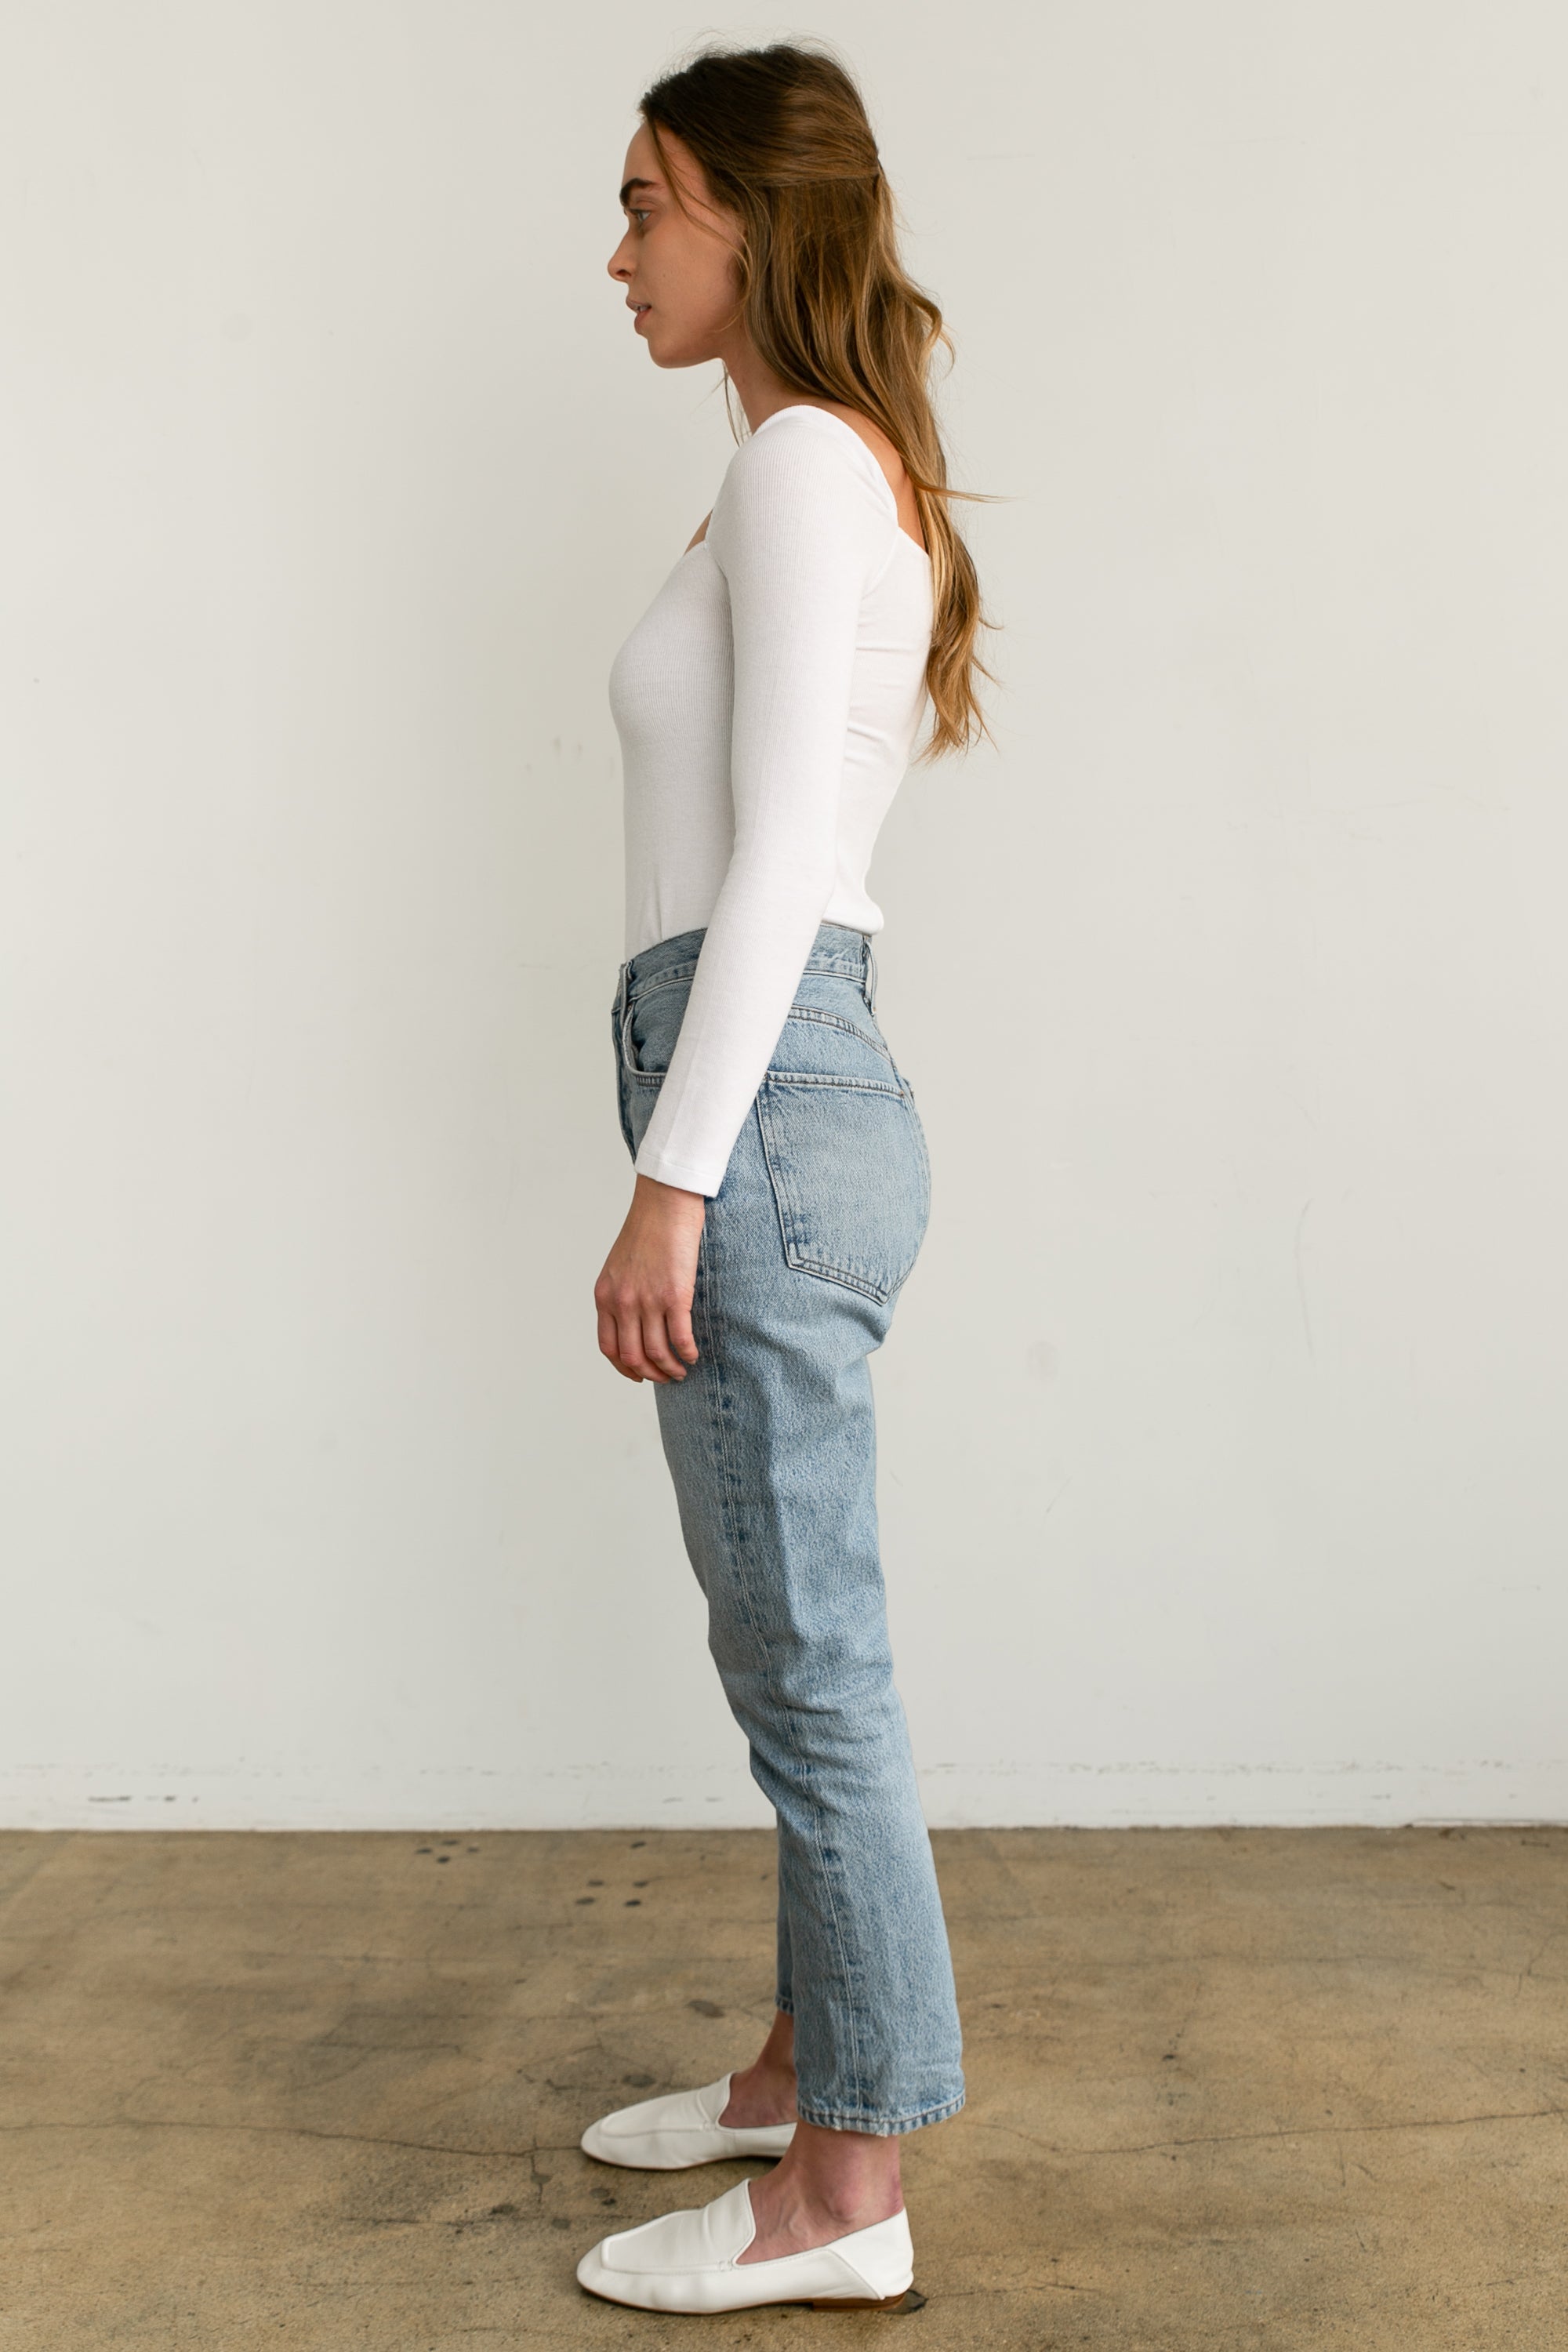 Slim Fitting Long Sleeves– Almina Concept